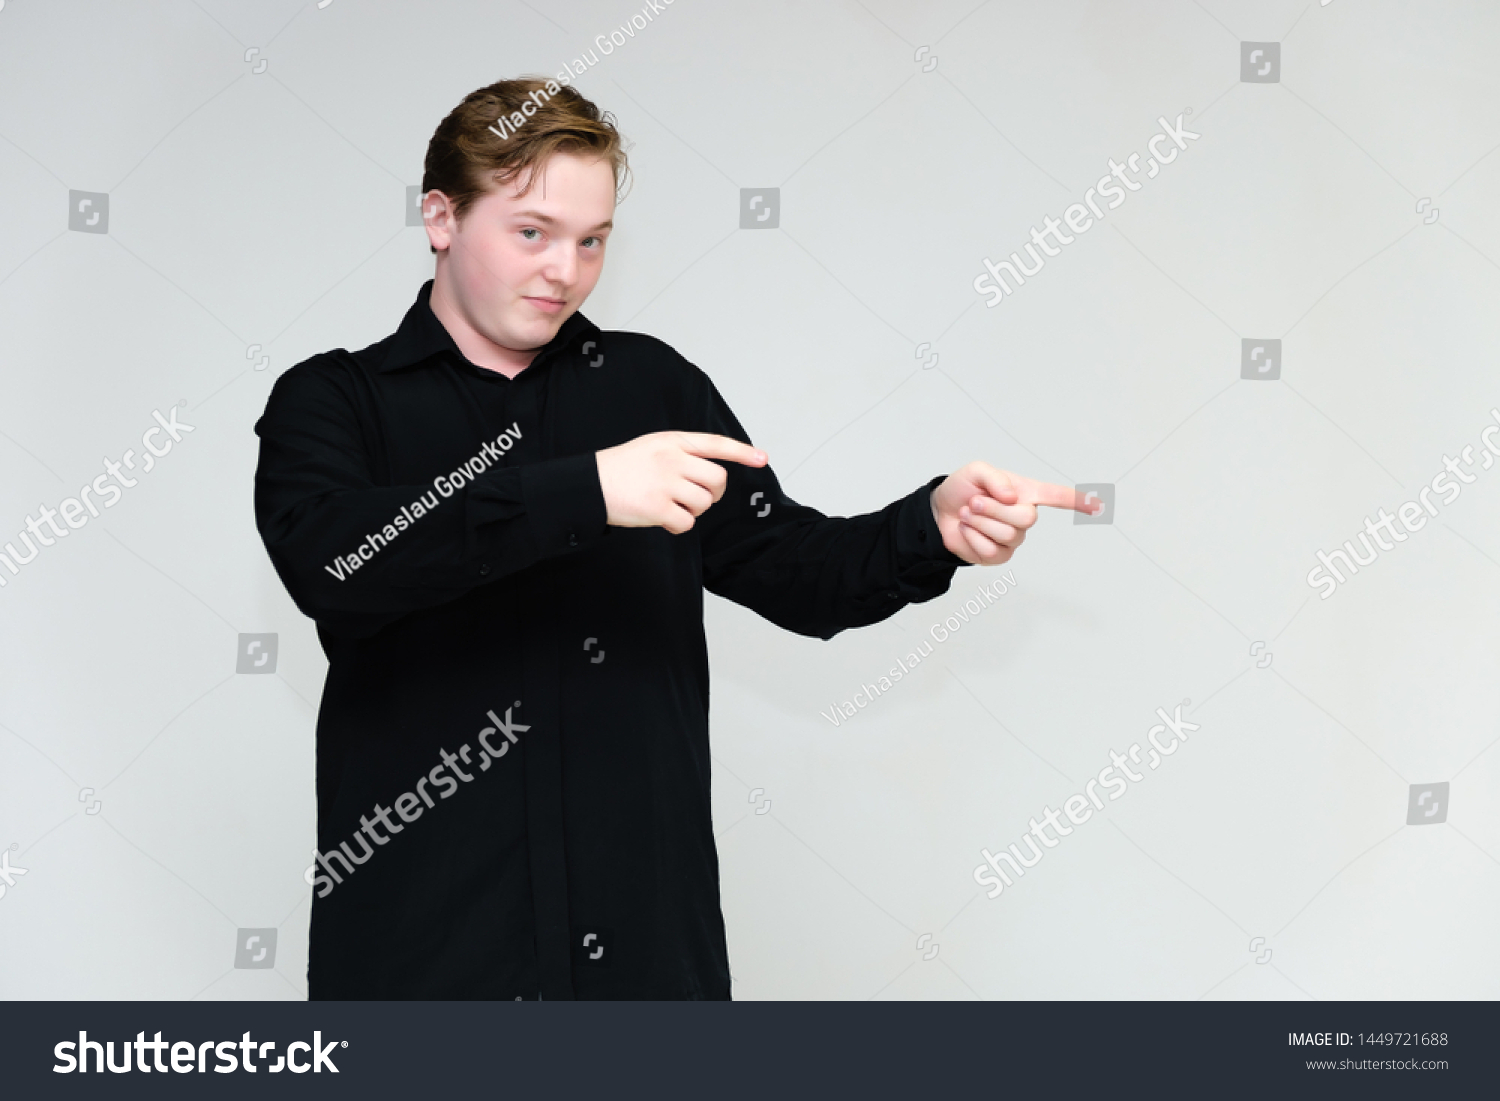 Portrait to the waist on a white background of a handsome young man in a black shirt. stands directly in front of the camera in different poses, talking, showing emotions, showing hands. #1449721688